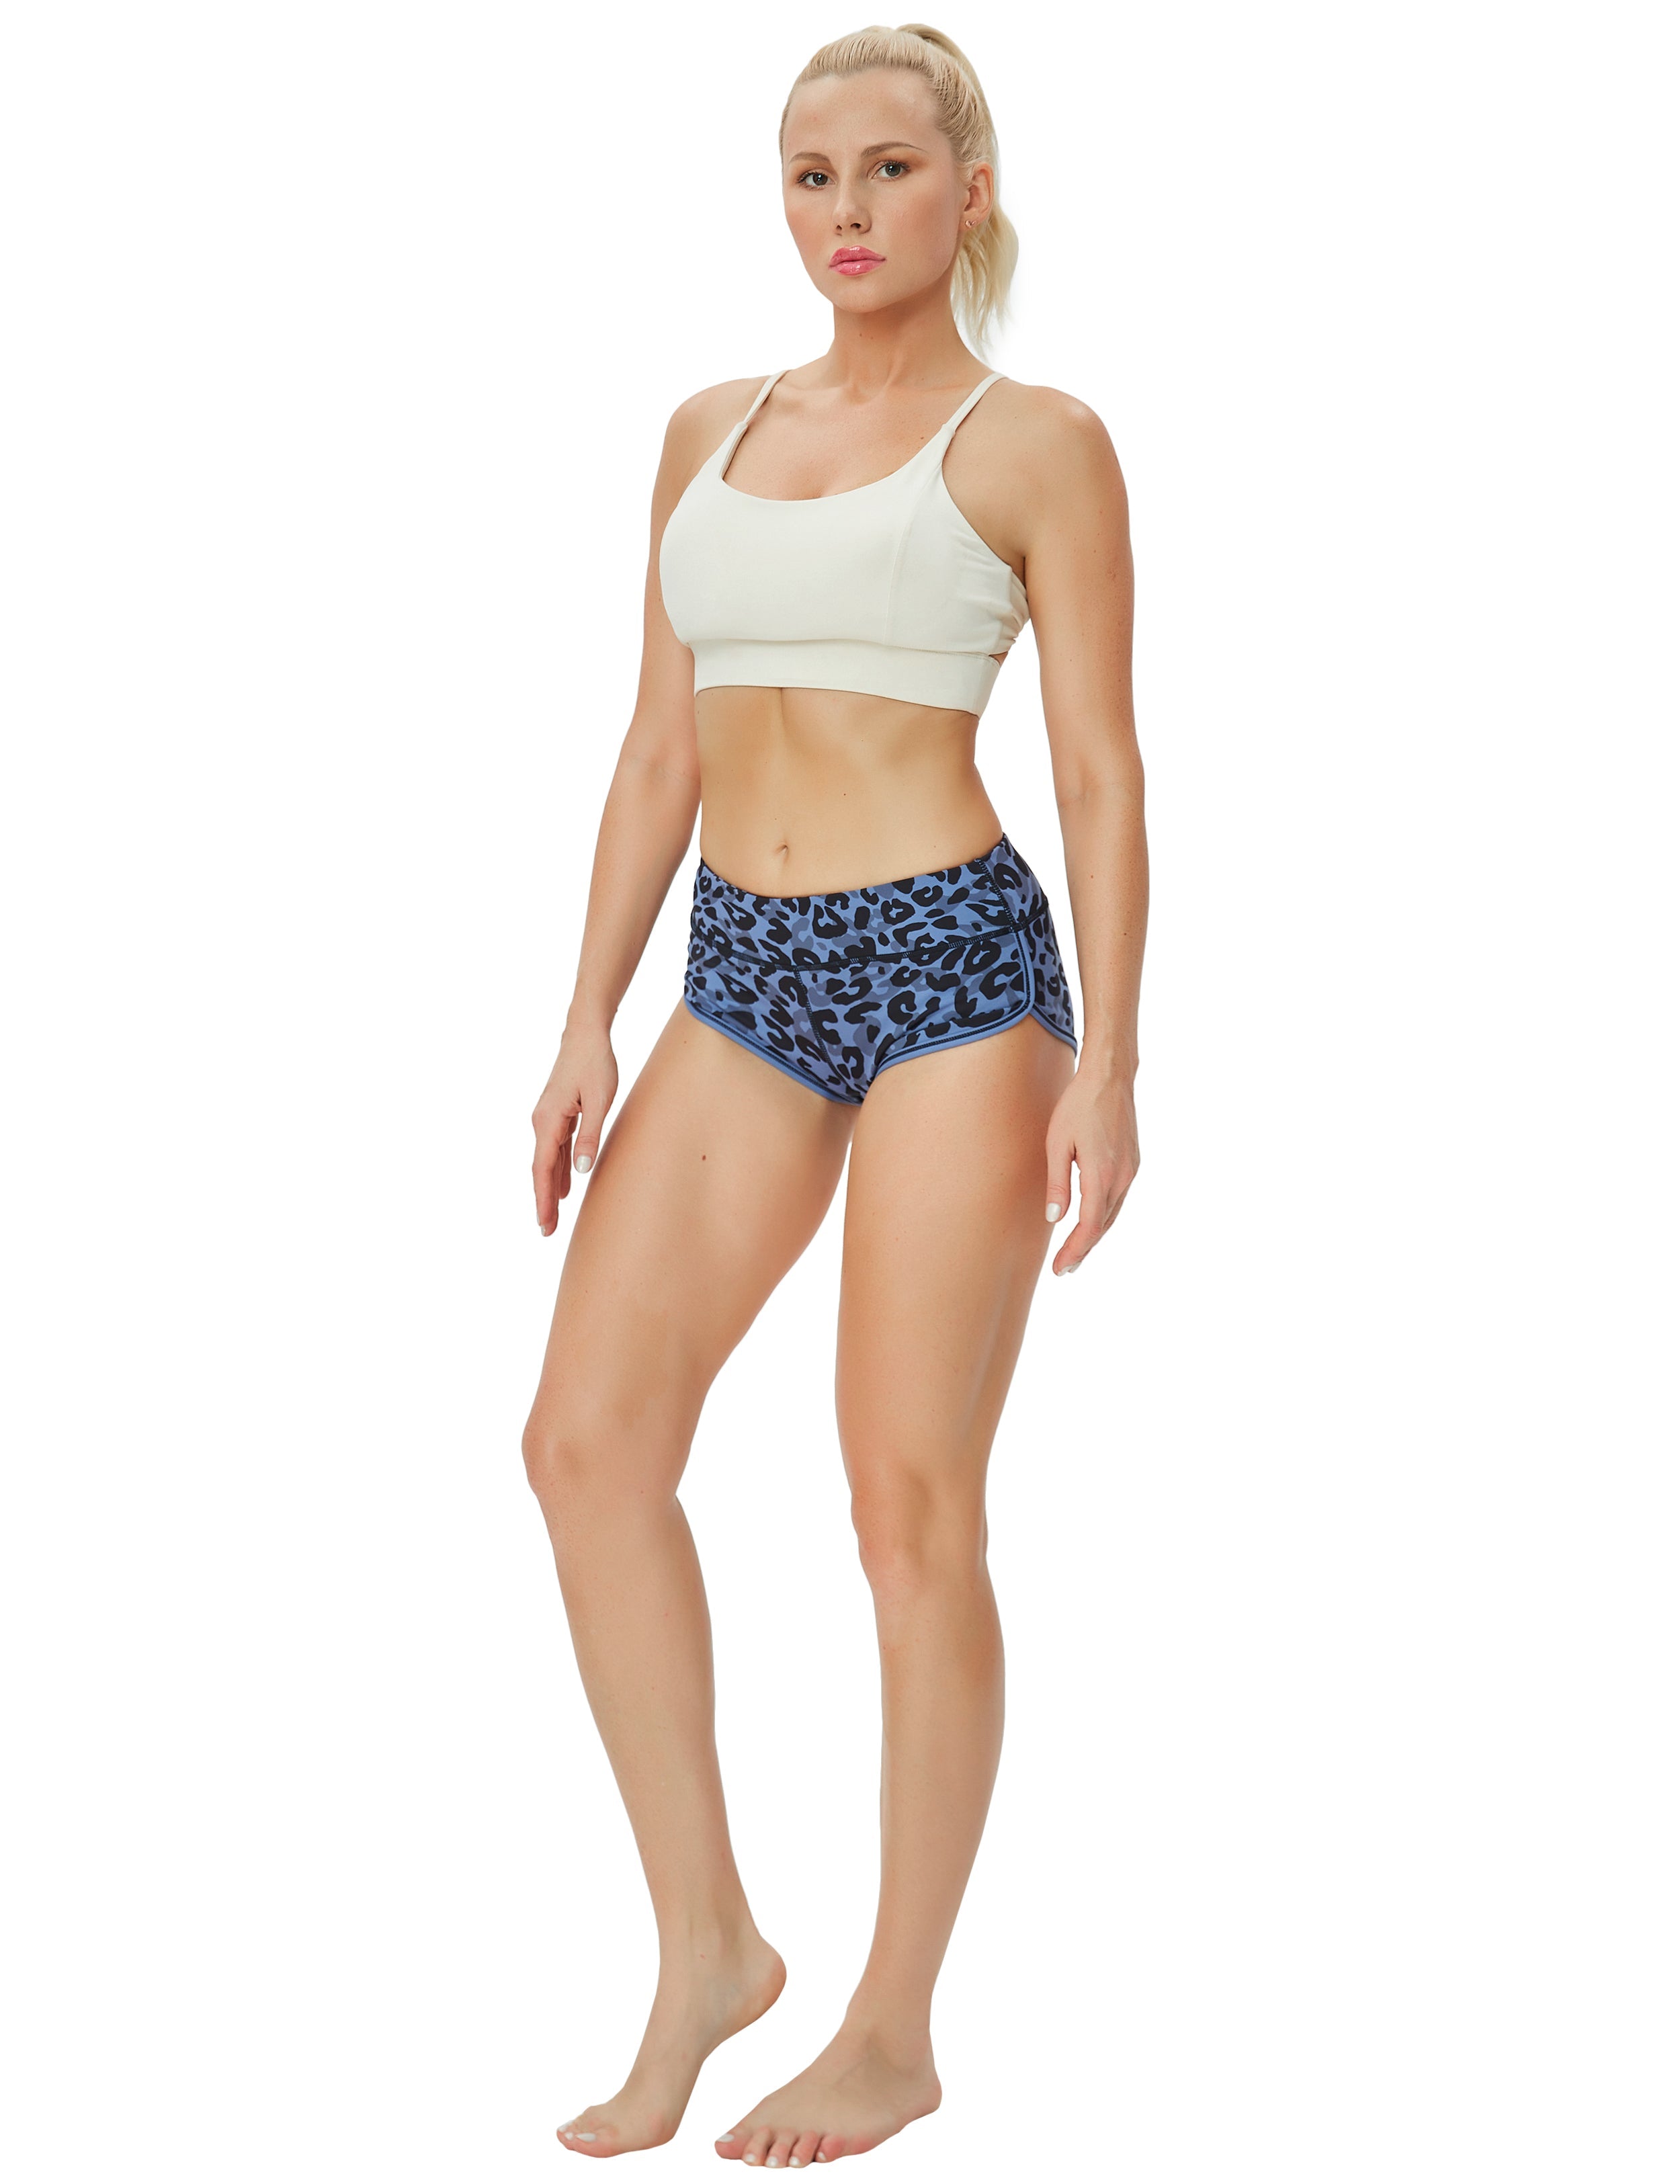 Printed Booty Pilates Shorts navy_leopard Sleek, soft, smooth and totally comfortable: our newest sexy style is here. Softest-ever fabric High elasticity High density 4-way stretch Fabric doesn't attract lint easily No see-through Moisture-wicking Machine wash 78% Polyester, 22% Spandex